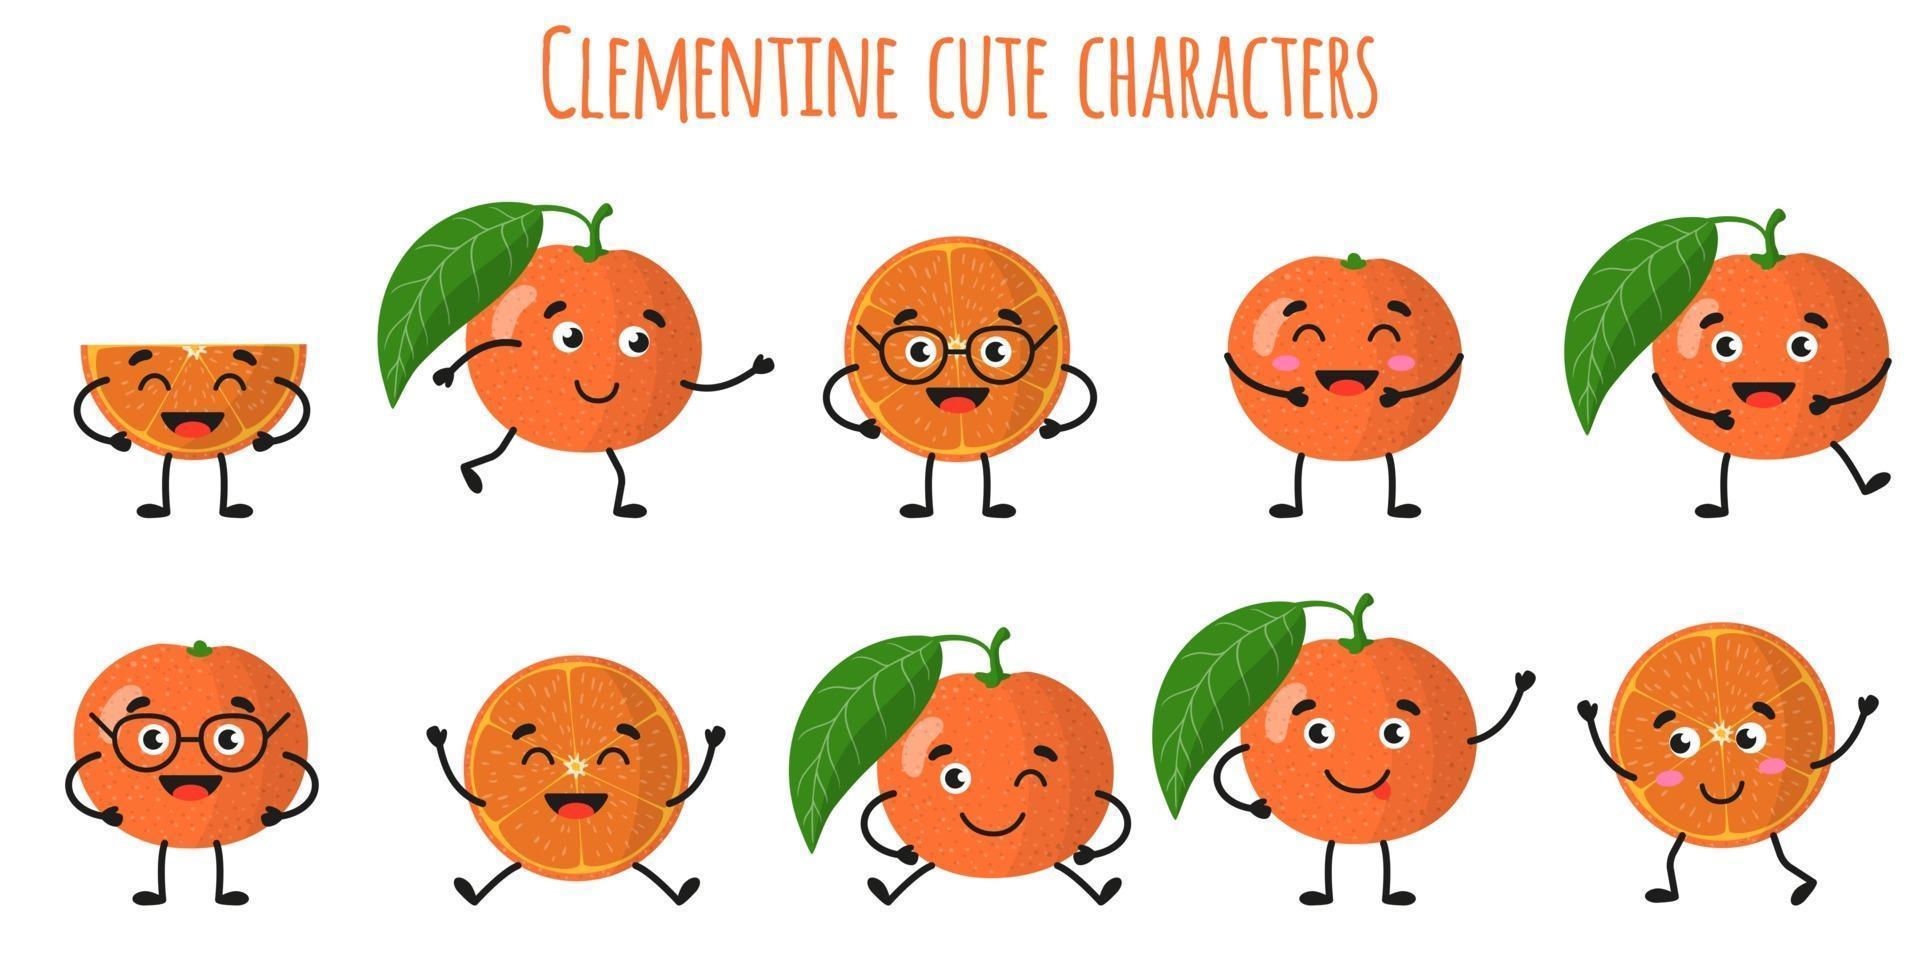 Clementine citrus fruit cute funny cheerful characters with different poses and emotions. vector